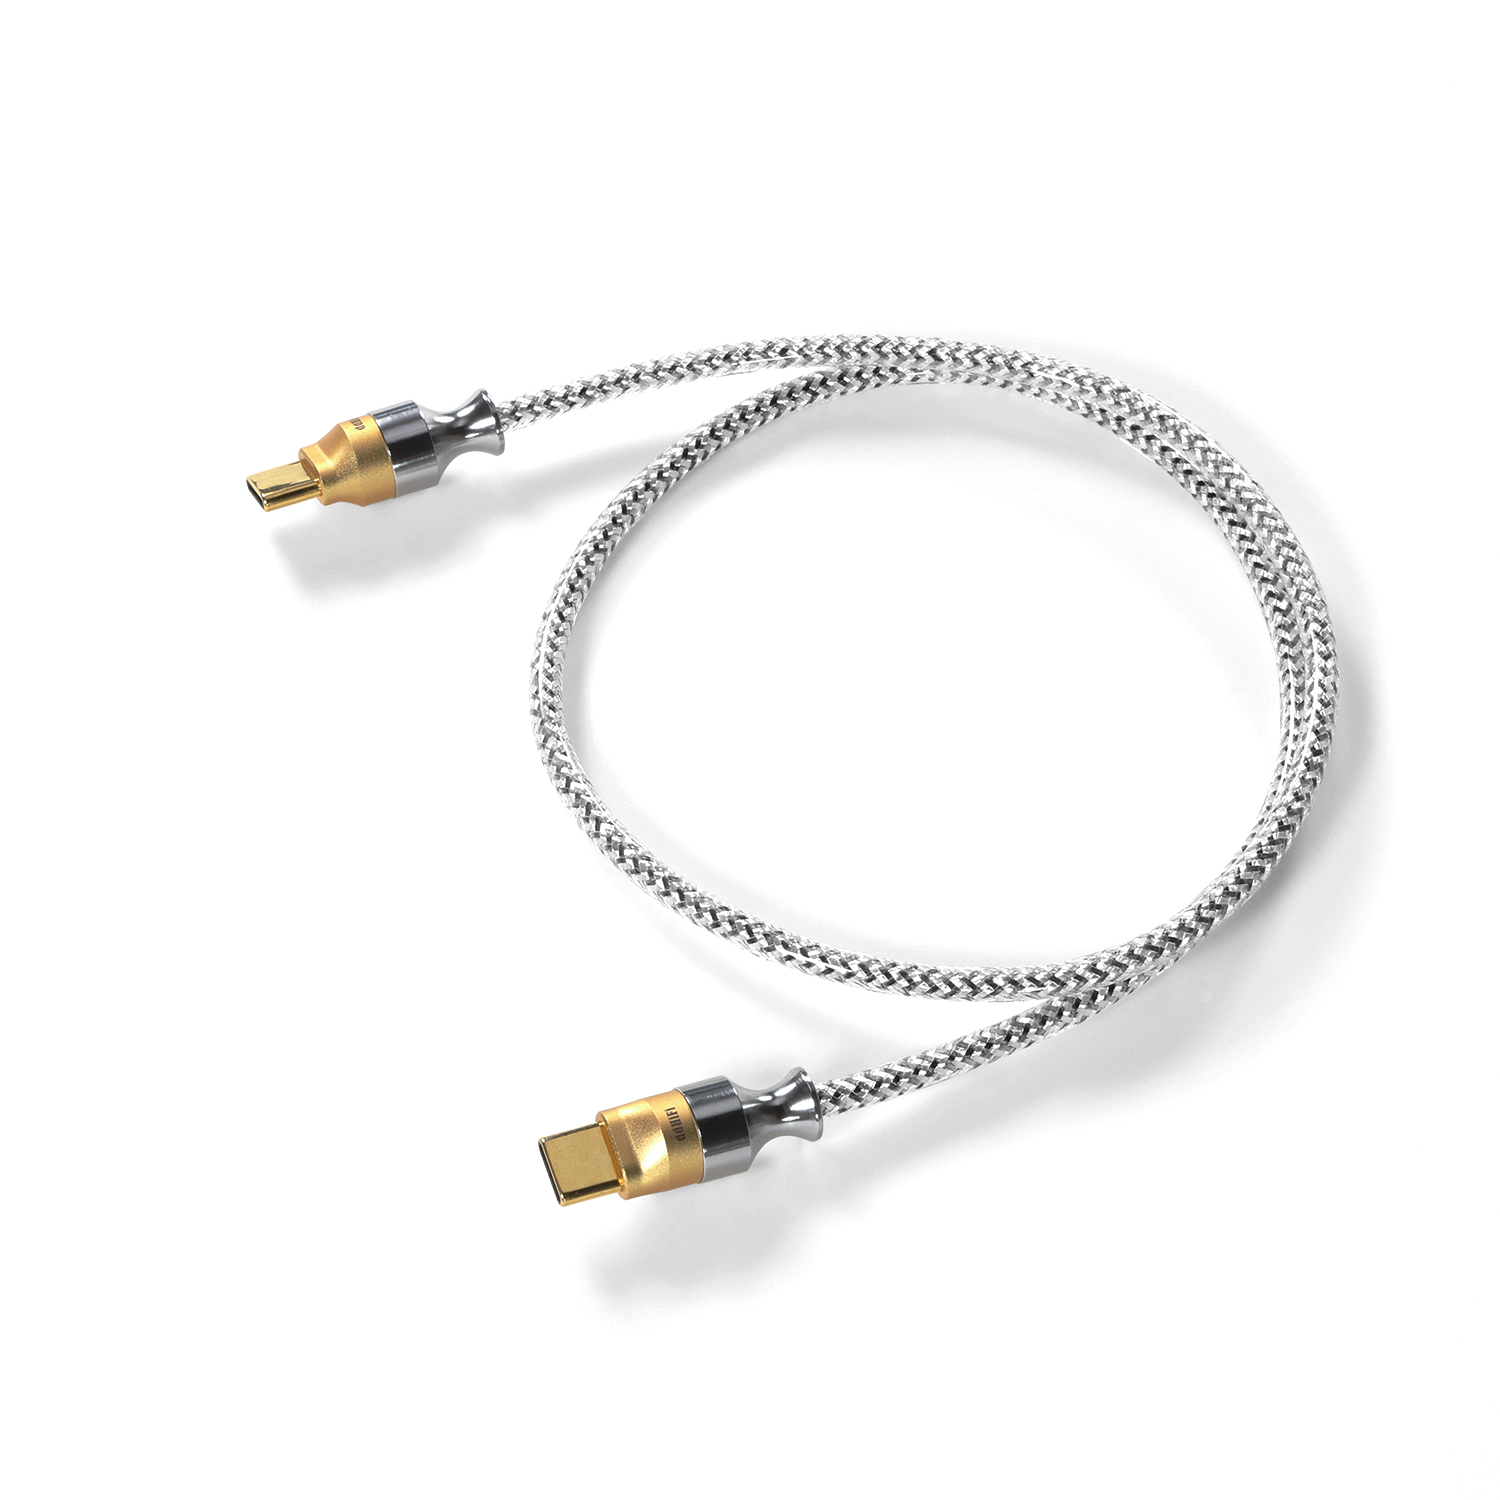 DD ddHiFi TC07S Nyx Series Silver TypeC HiFi Audiophile USB OTG Cable with Litz Silver Plated over LCOFC Shielding 10cm/ 50cm